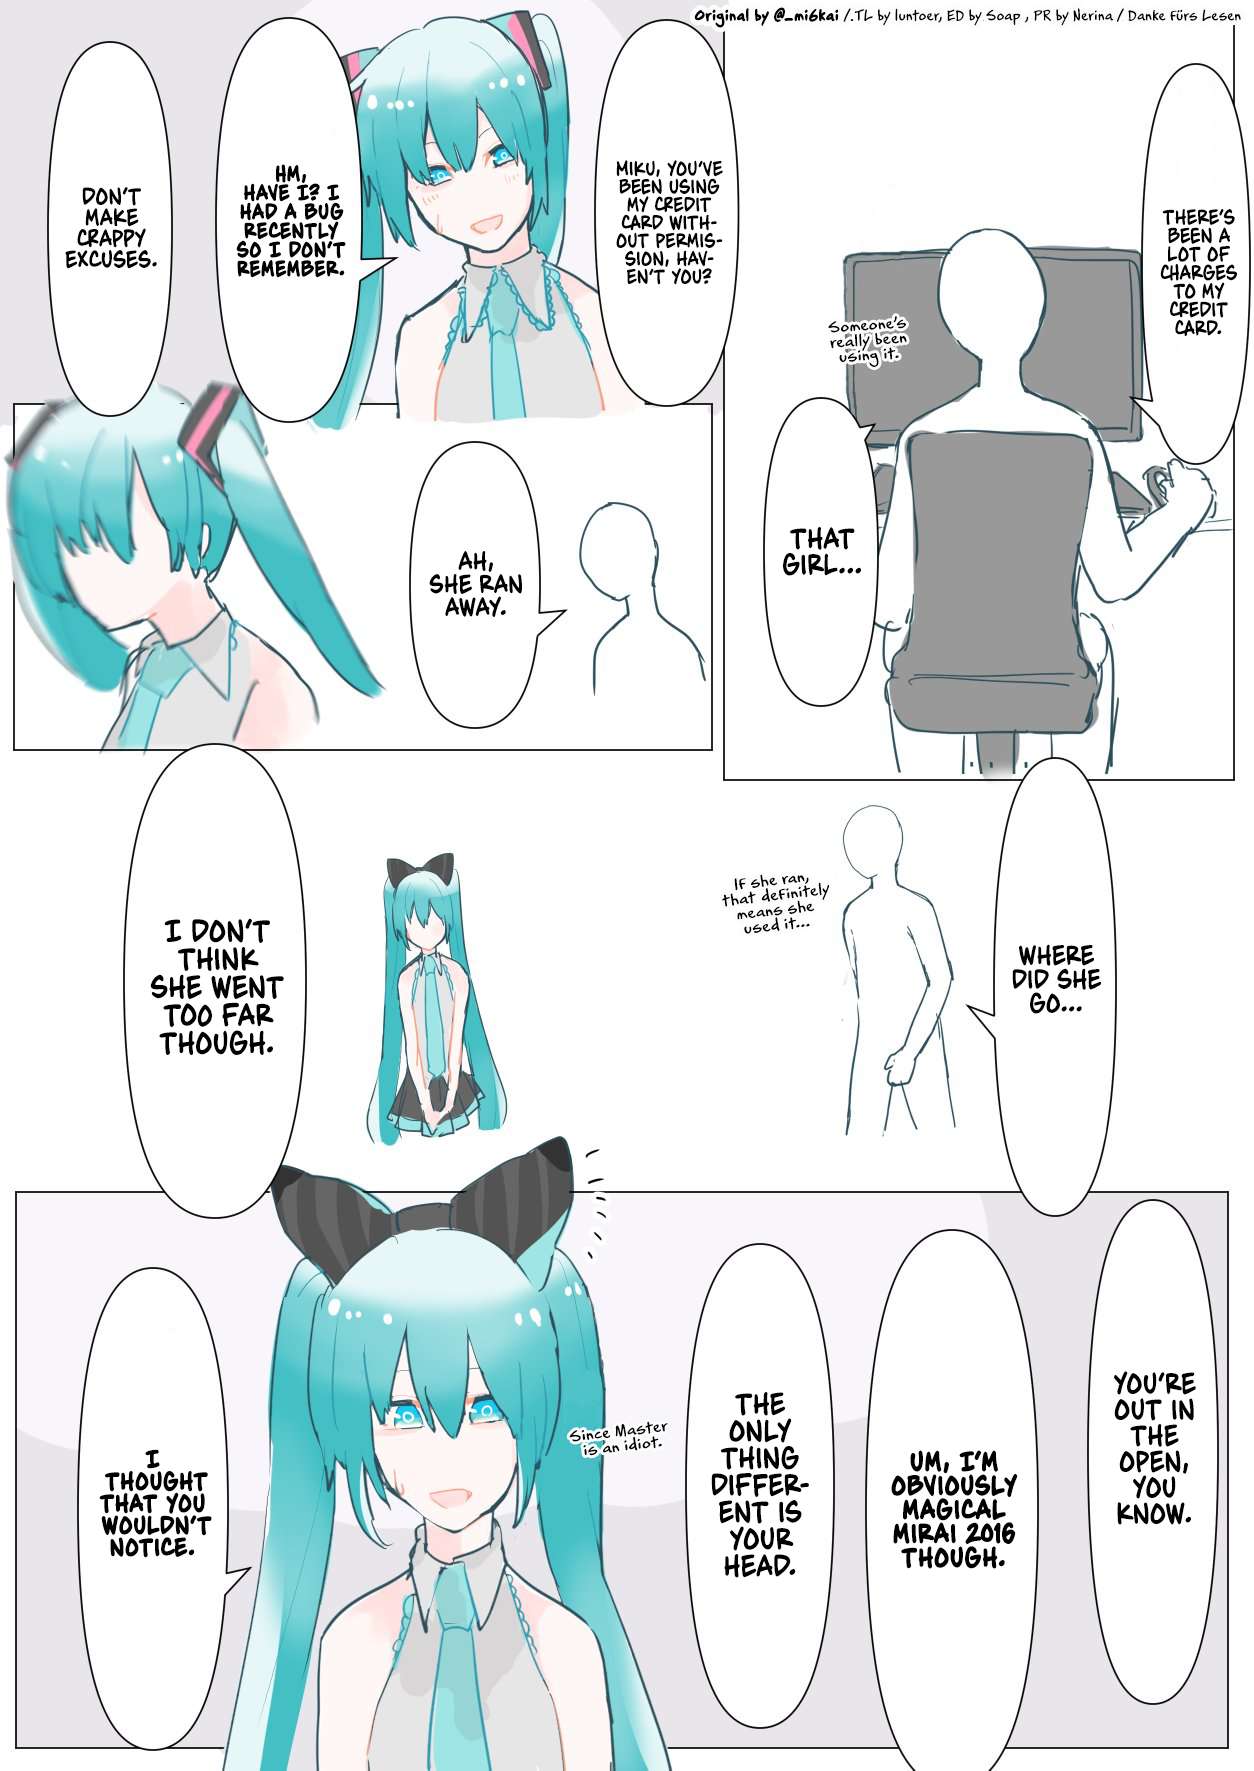 The Daily Life Of Master & Hatsune Miku - chapter 34 - #1